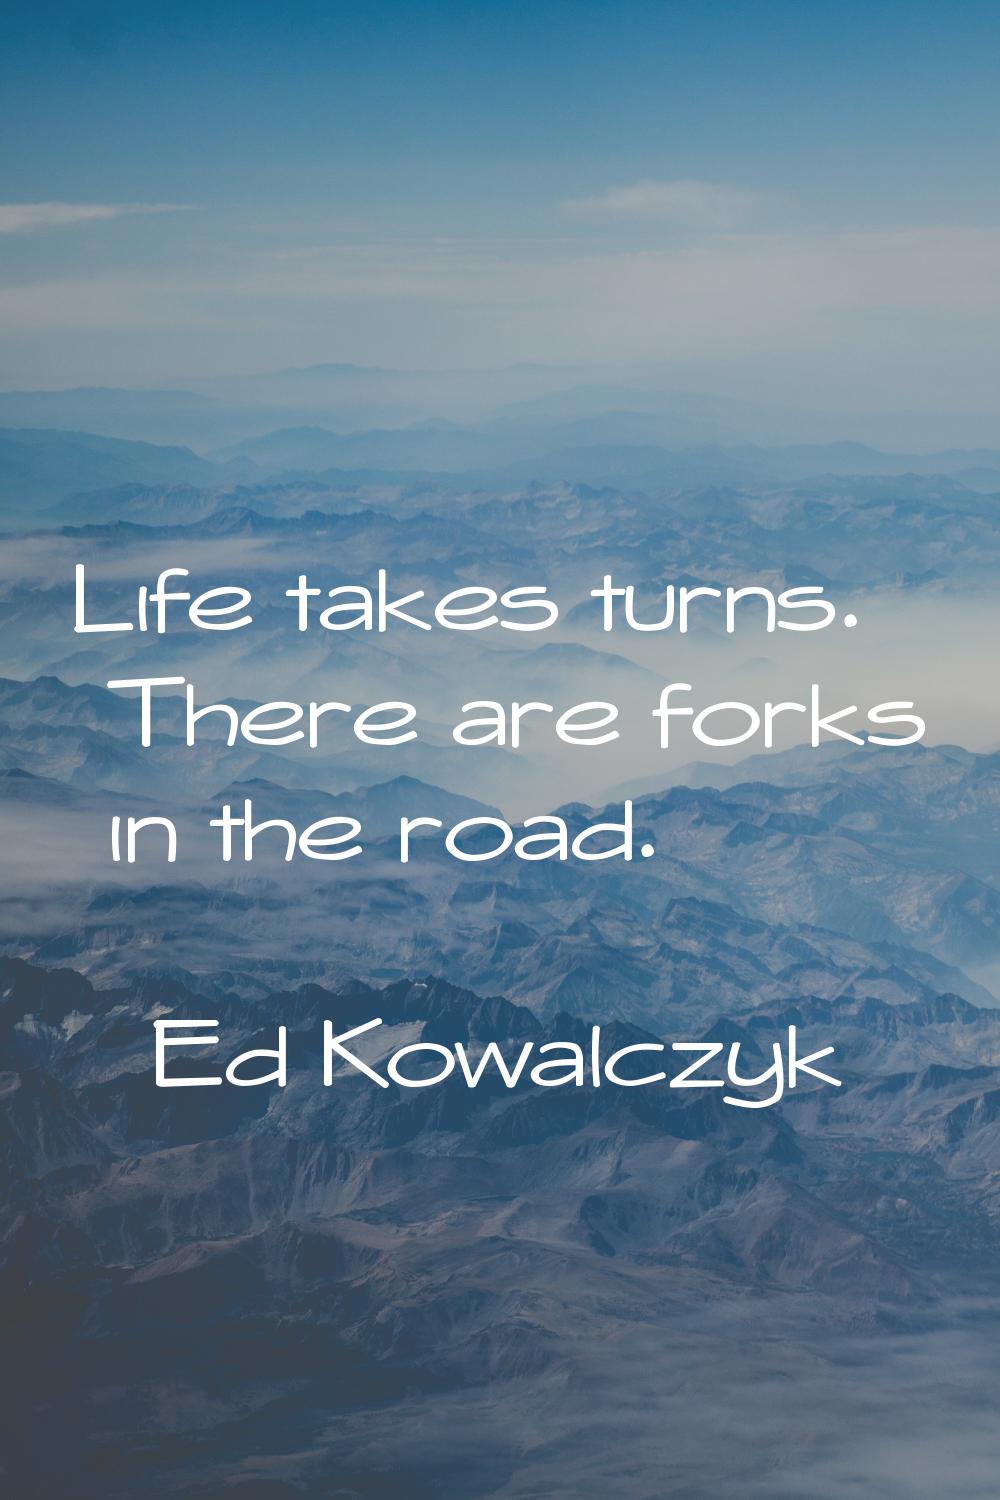 Life takes turns. There are forks in the road.